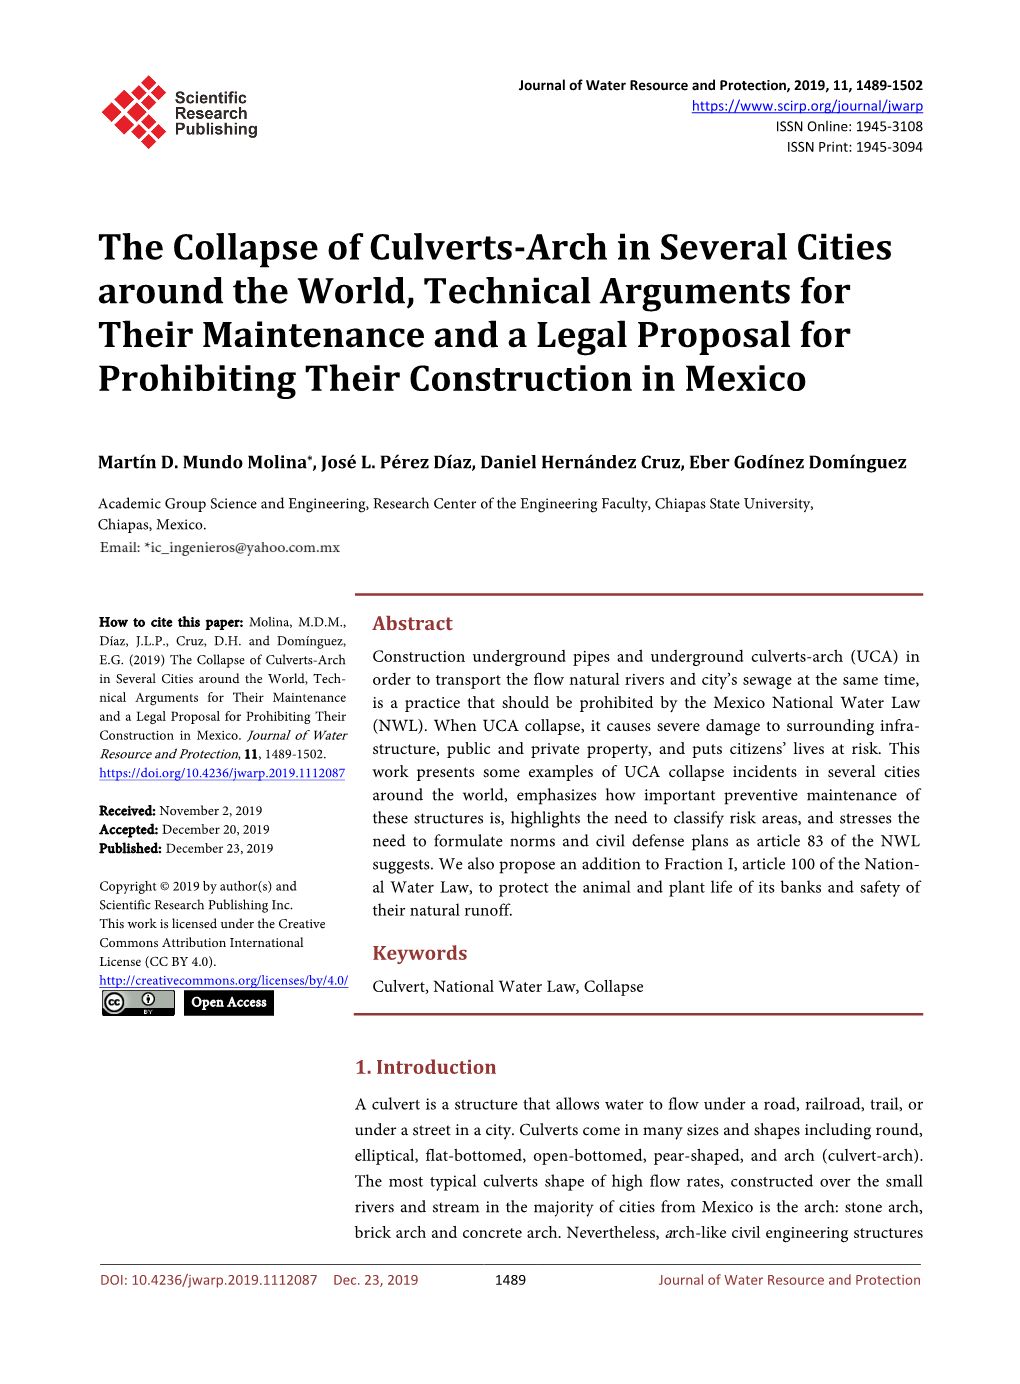 The Collapse of Culverts-Arch in Several Cities Around the World